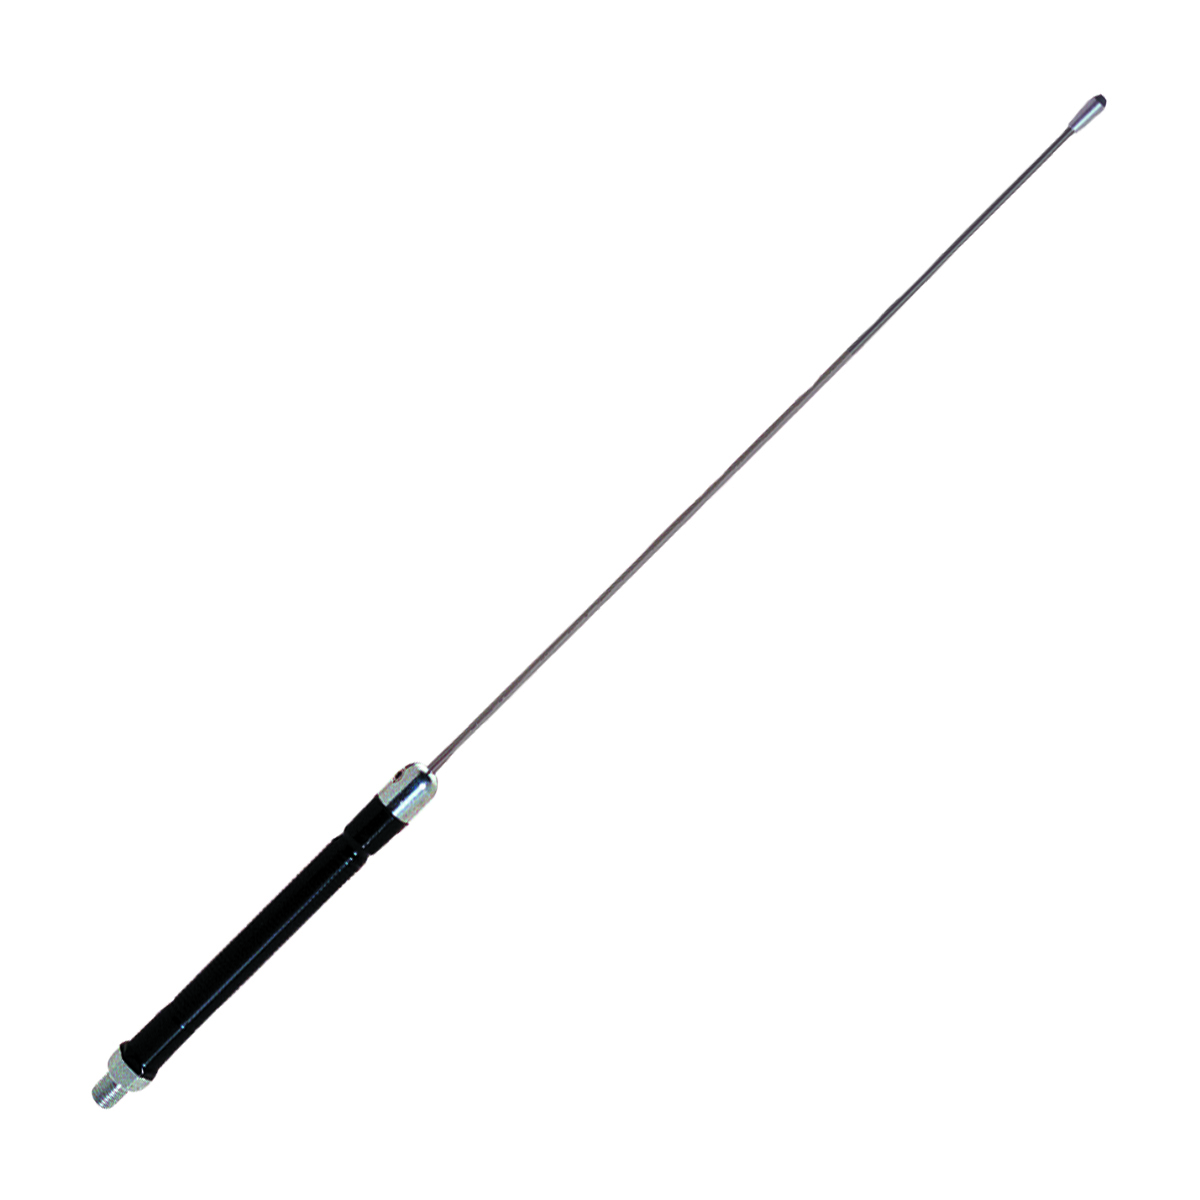 EVERHARDT - C270-B BLACK 57" BASE LOAD CB ANTENNA WITH STAINLESS STEEL WHIP